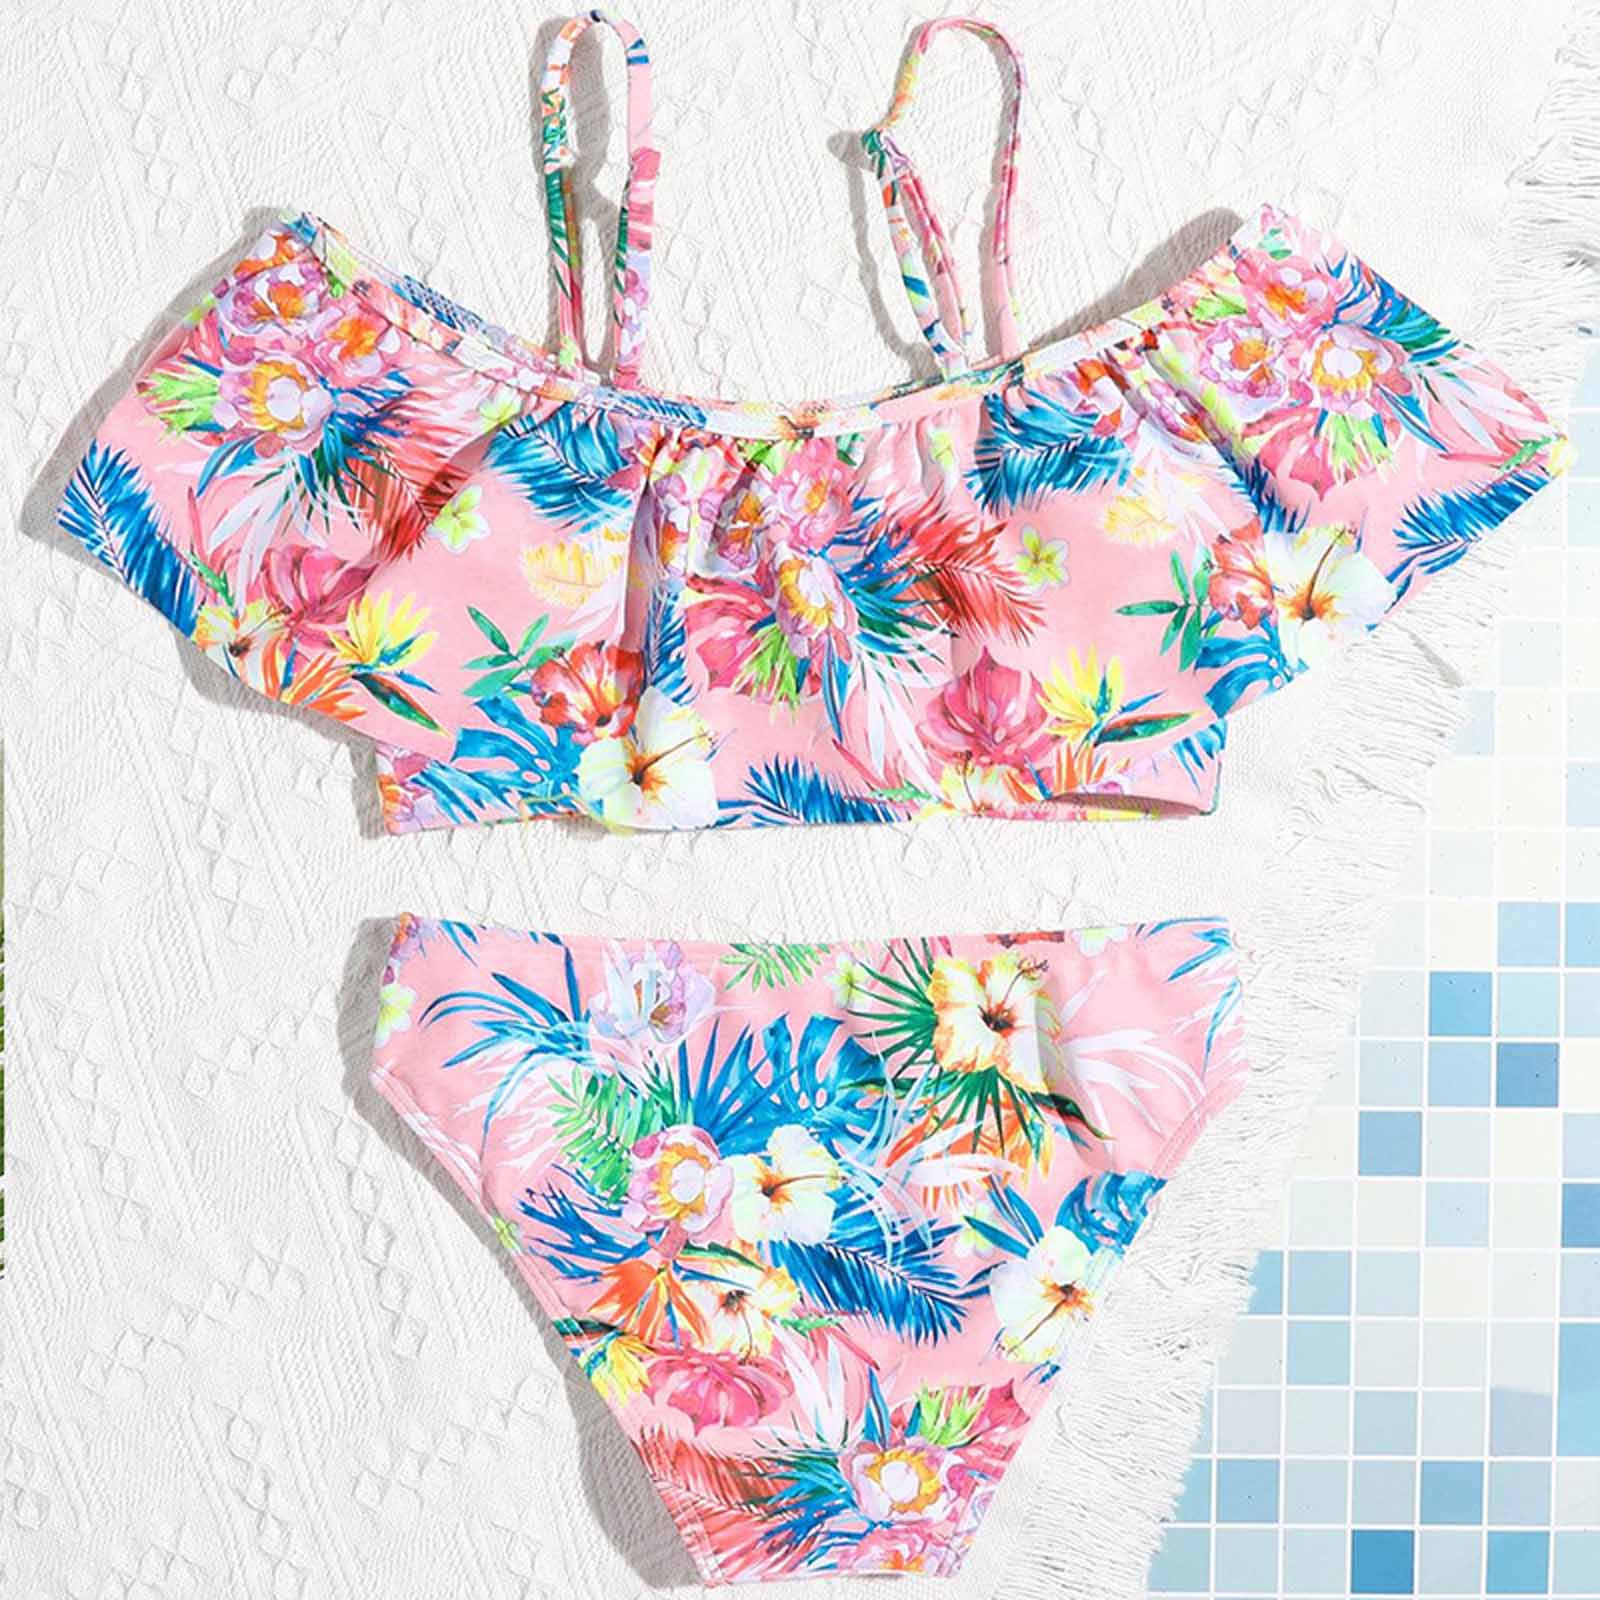 Edvintorg 8-15 Years Floral Swimsuits For Teenagers Girls Clearance ...